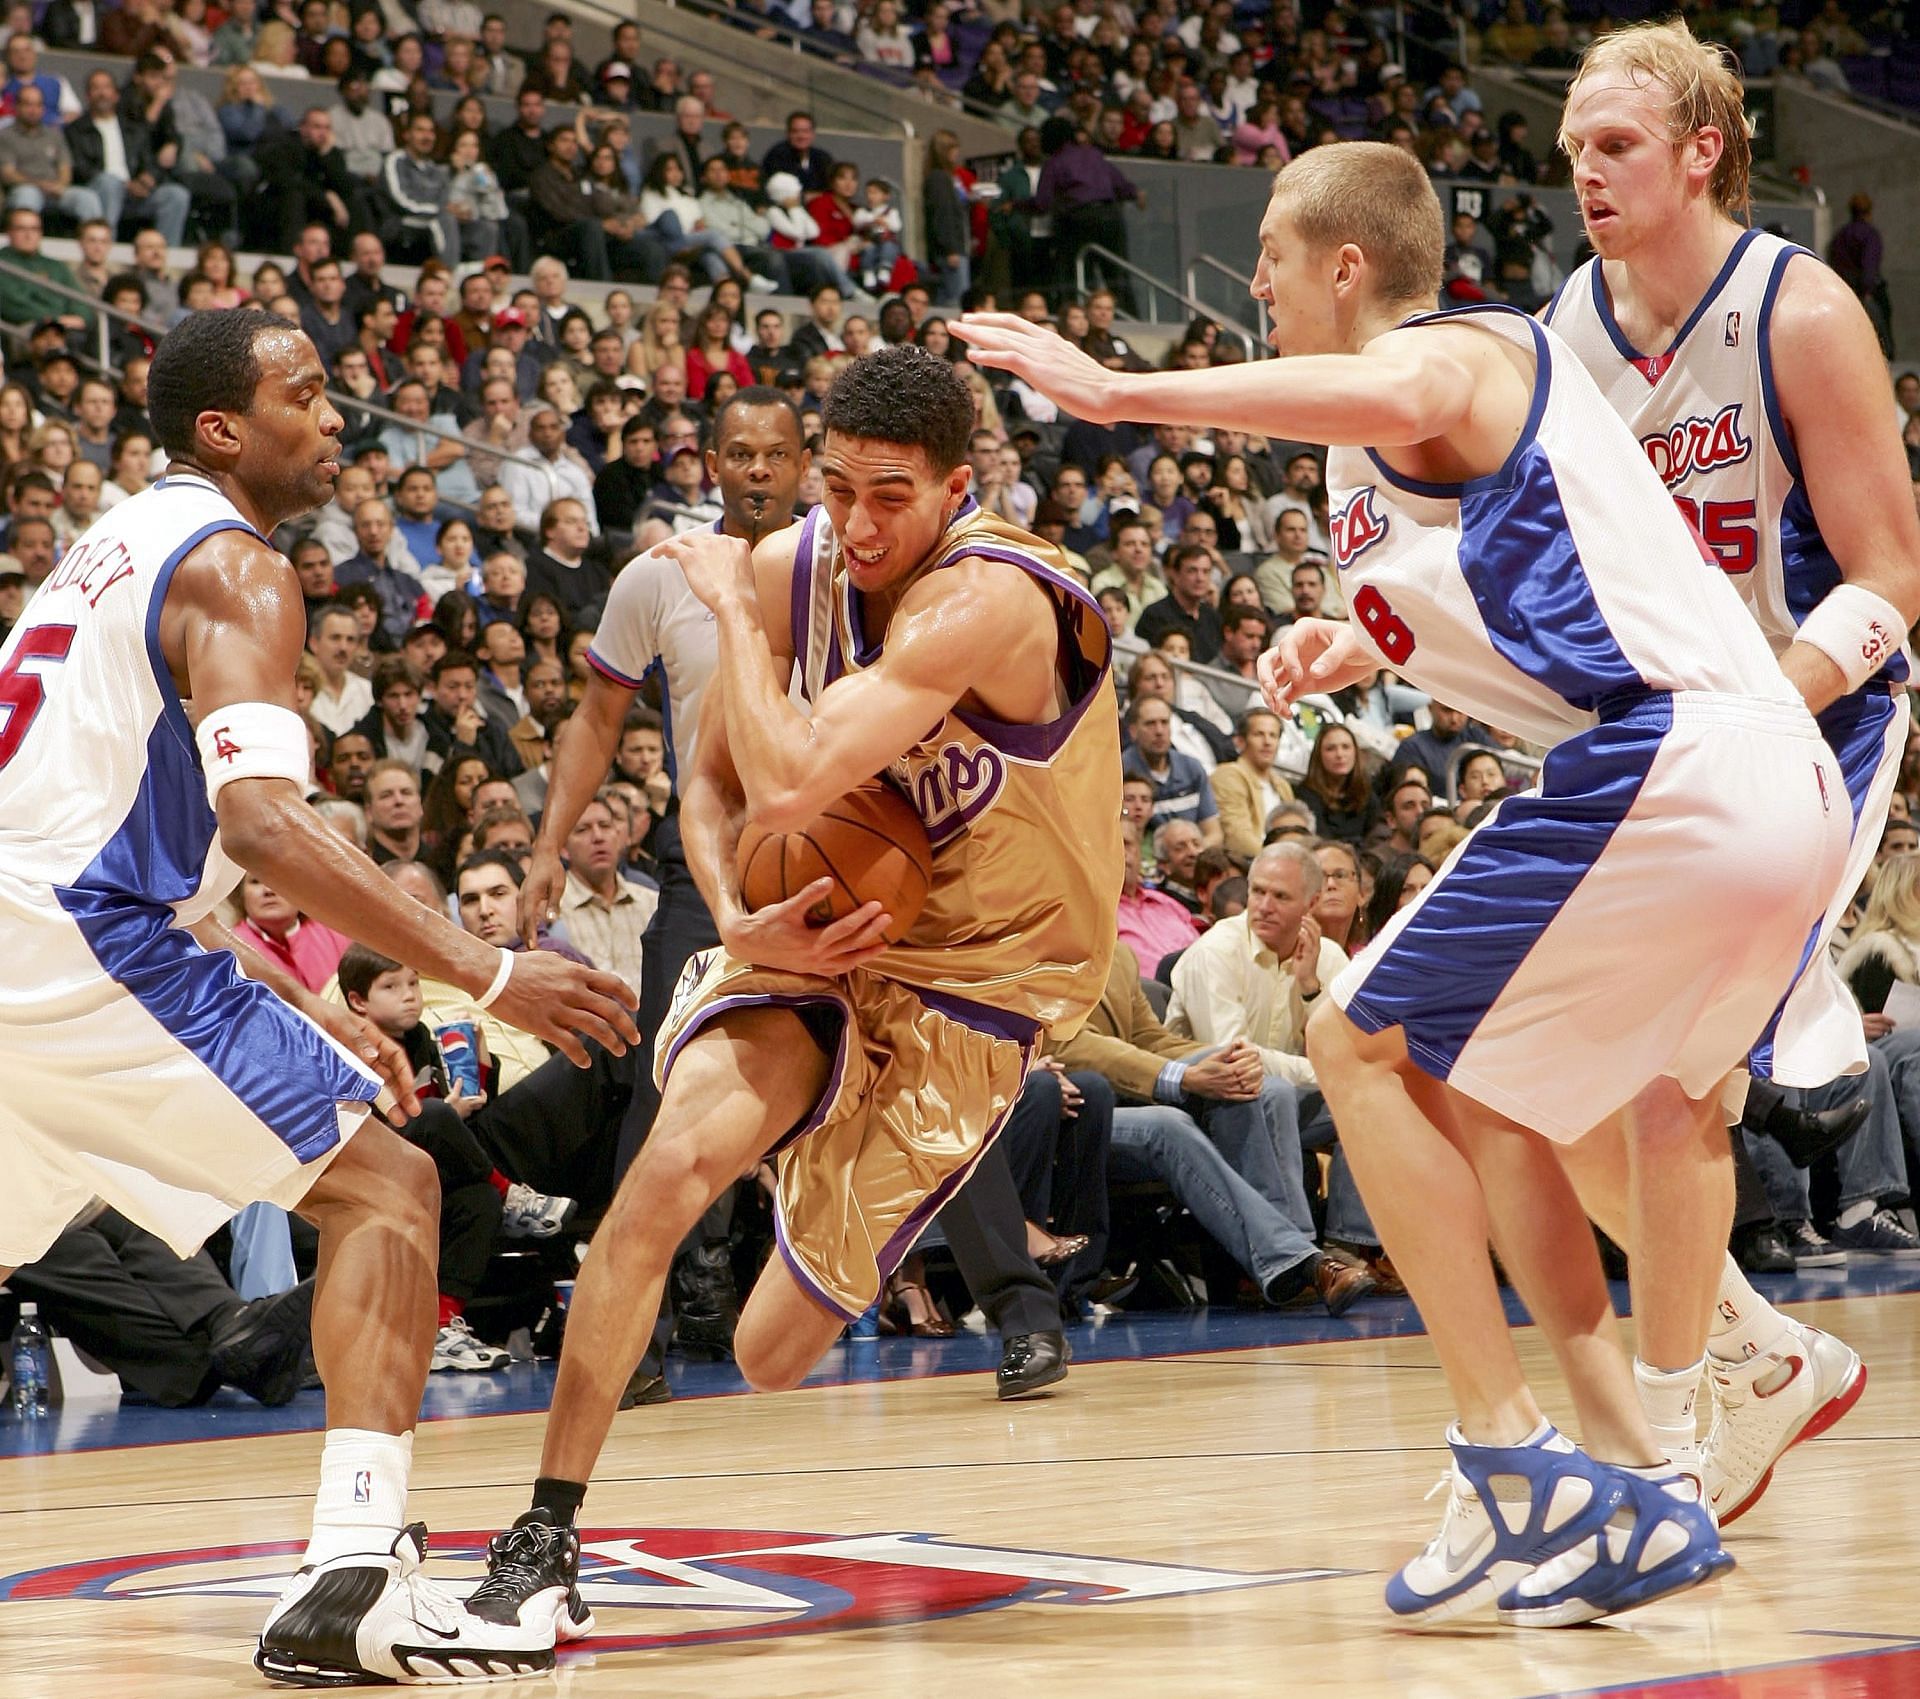 Korolev (right) was among the youngest NBA players ever (Image via Getty Images)